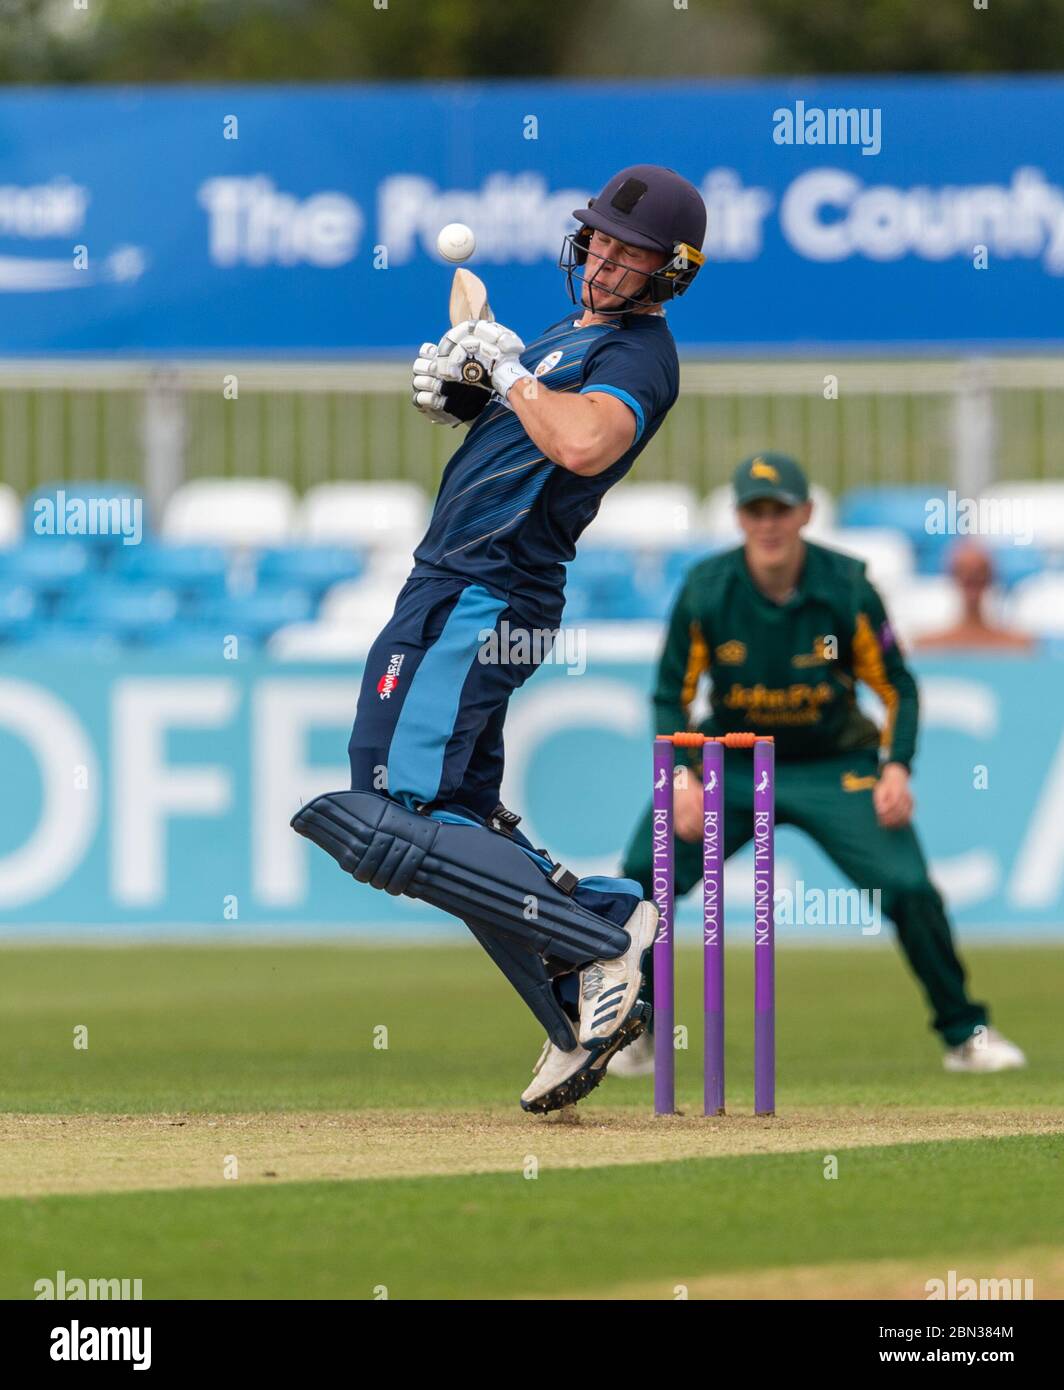 Tom Wood avoiding a bouncer whilst batting for Derbyshire 2nd XI against Nottinghamshire in a One Day Trophy Match 1 May 2019 Stock Photo